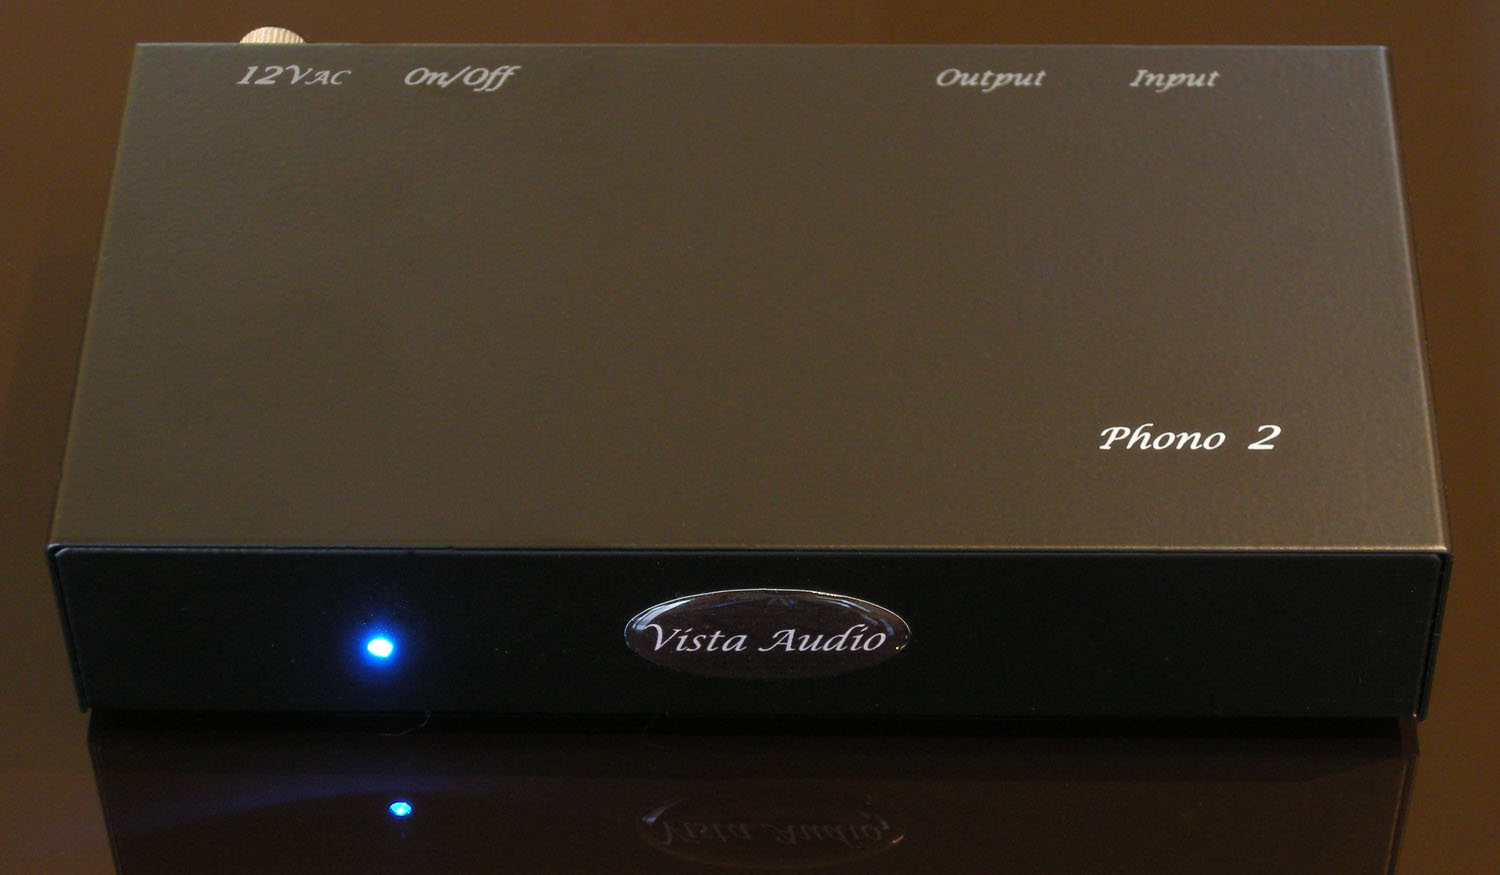 Phono-2 front